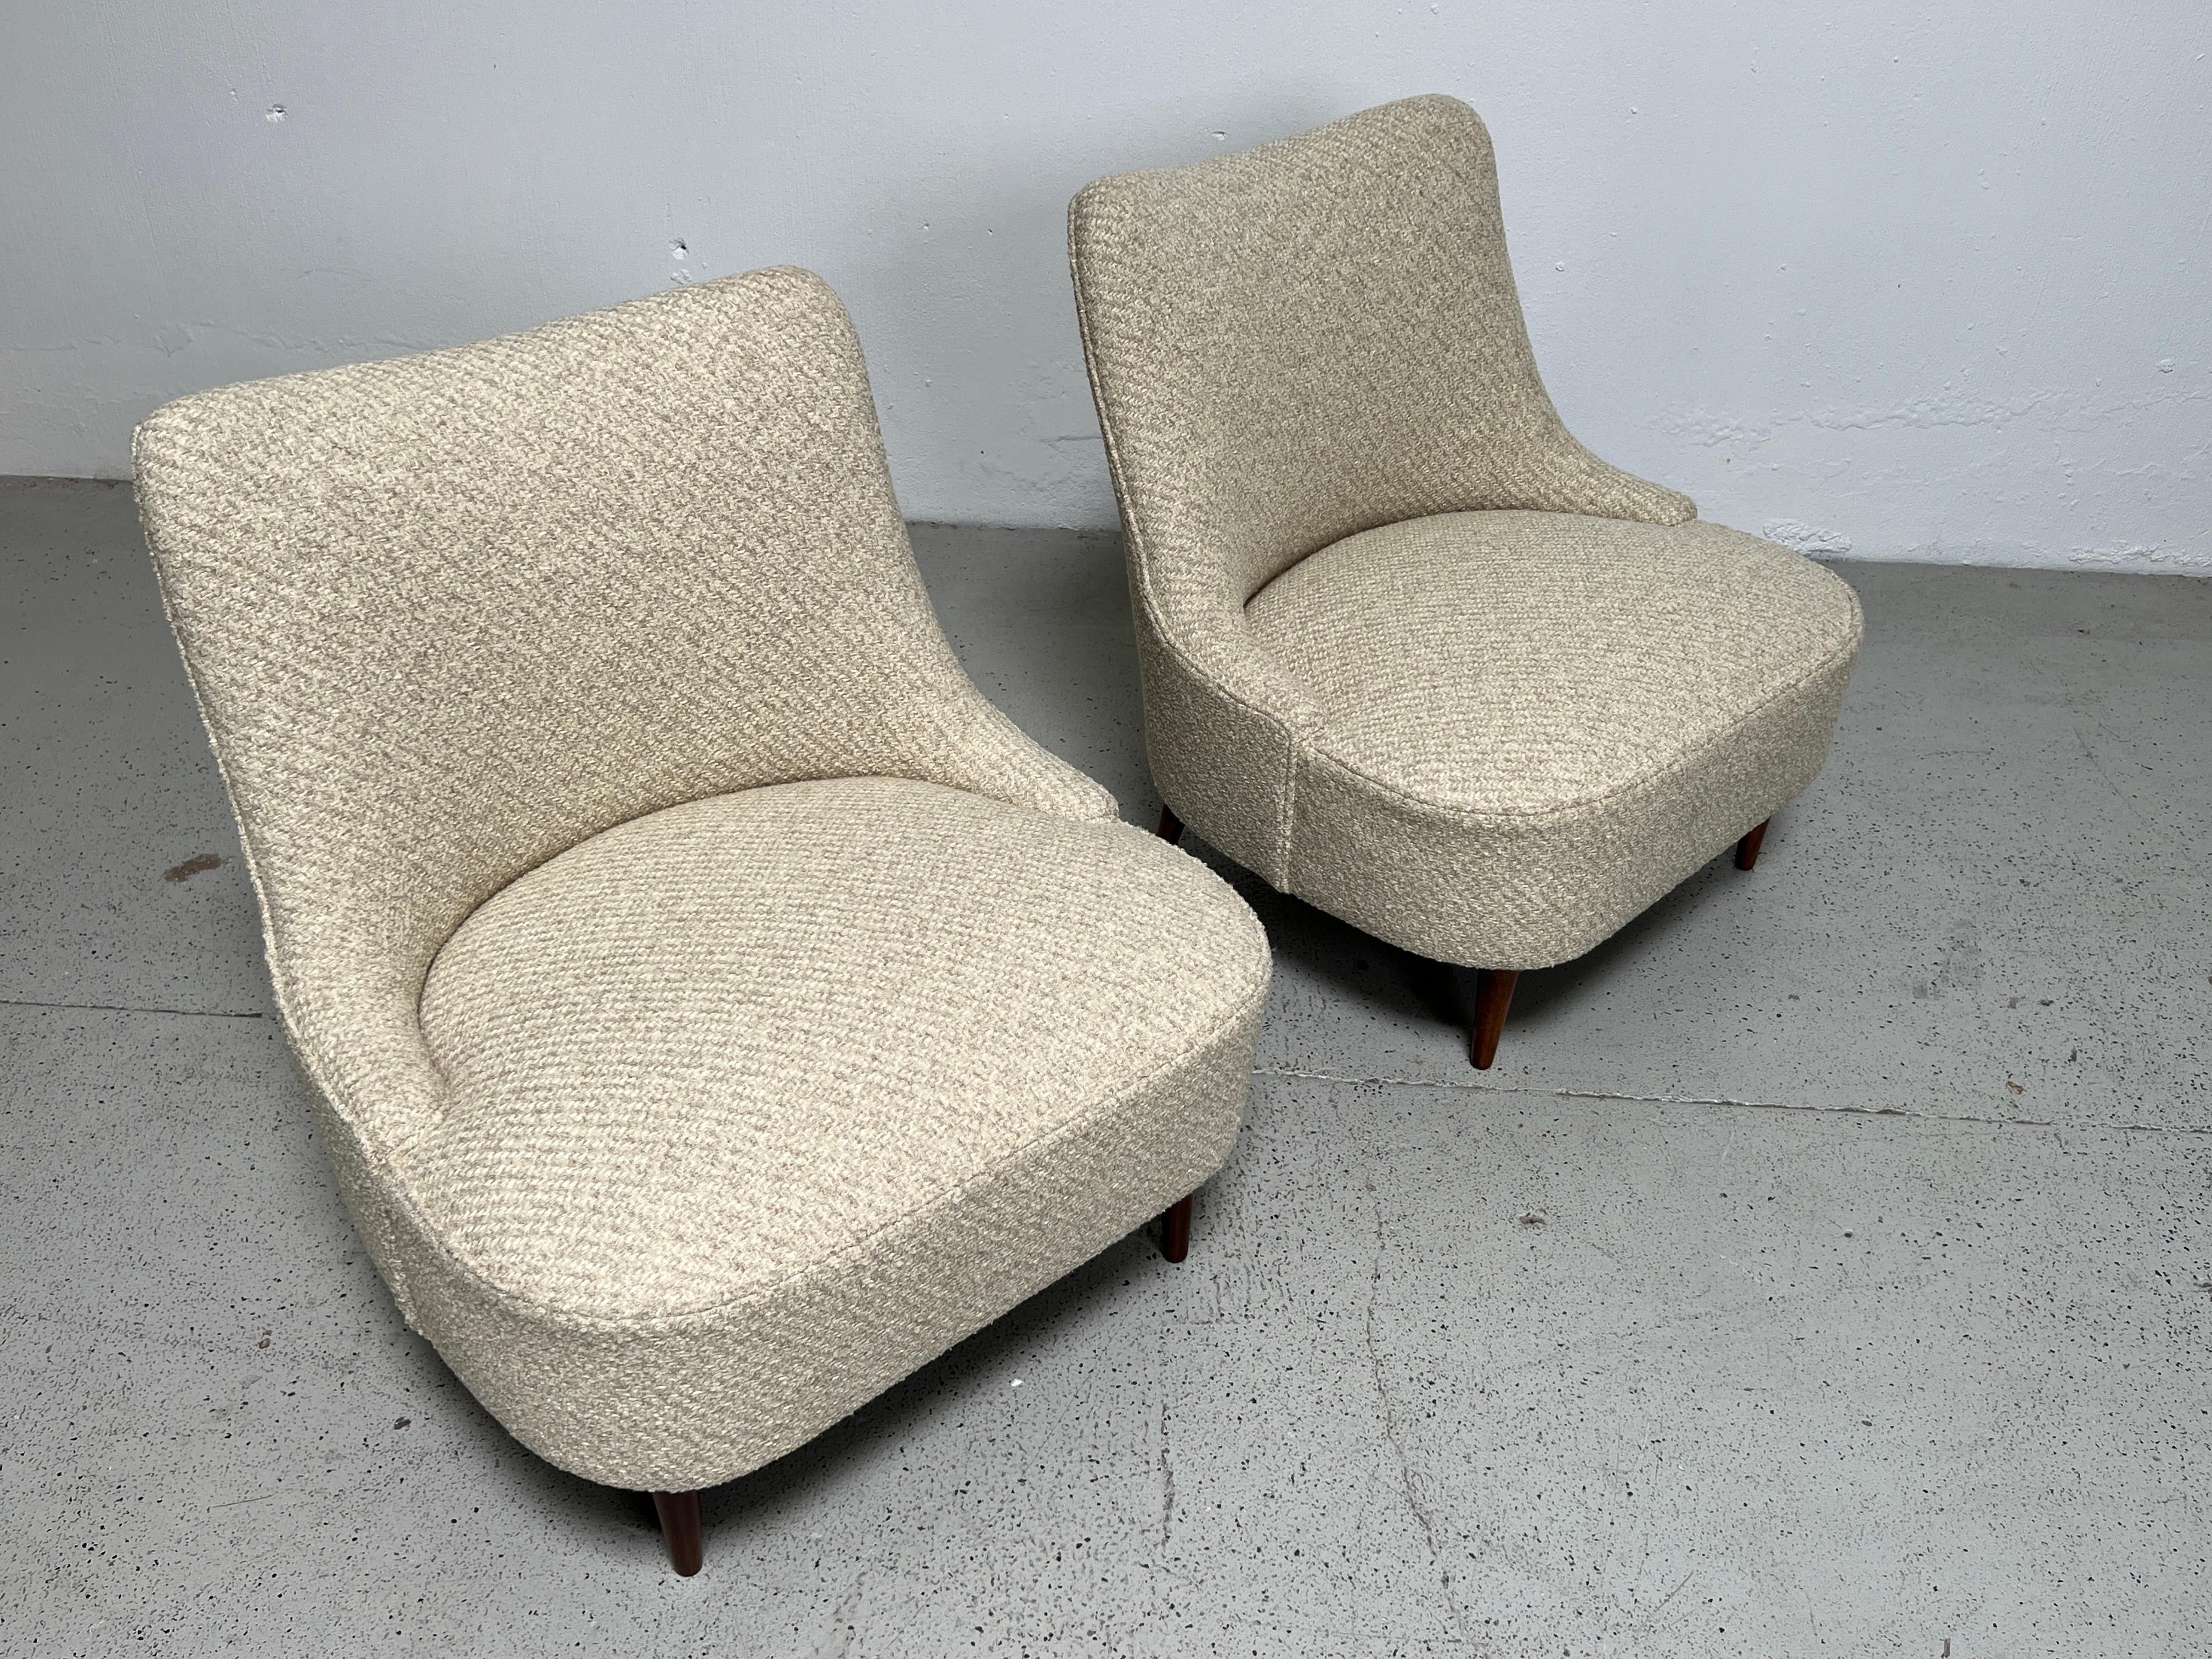 Pair of Dunbar Teardrop Chairs by Edward Wormley For Sale 2